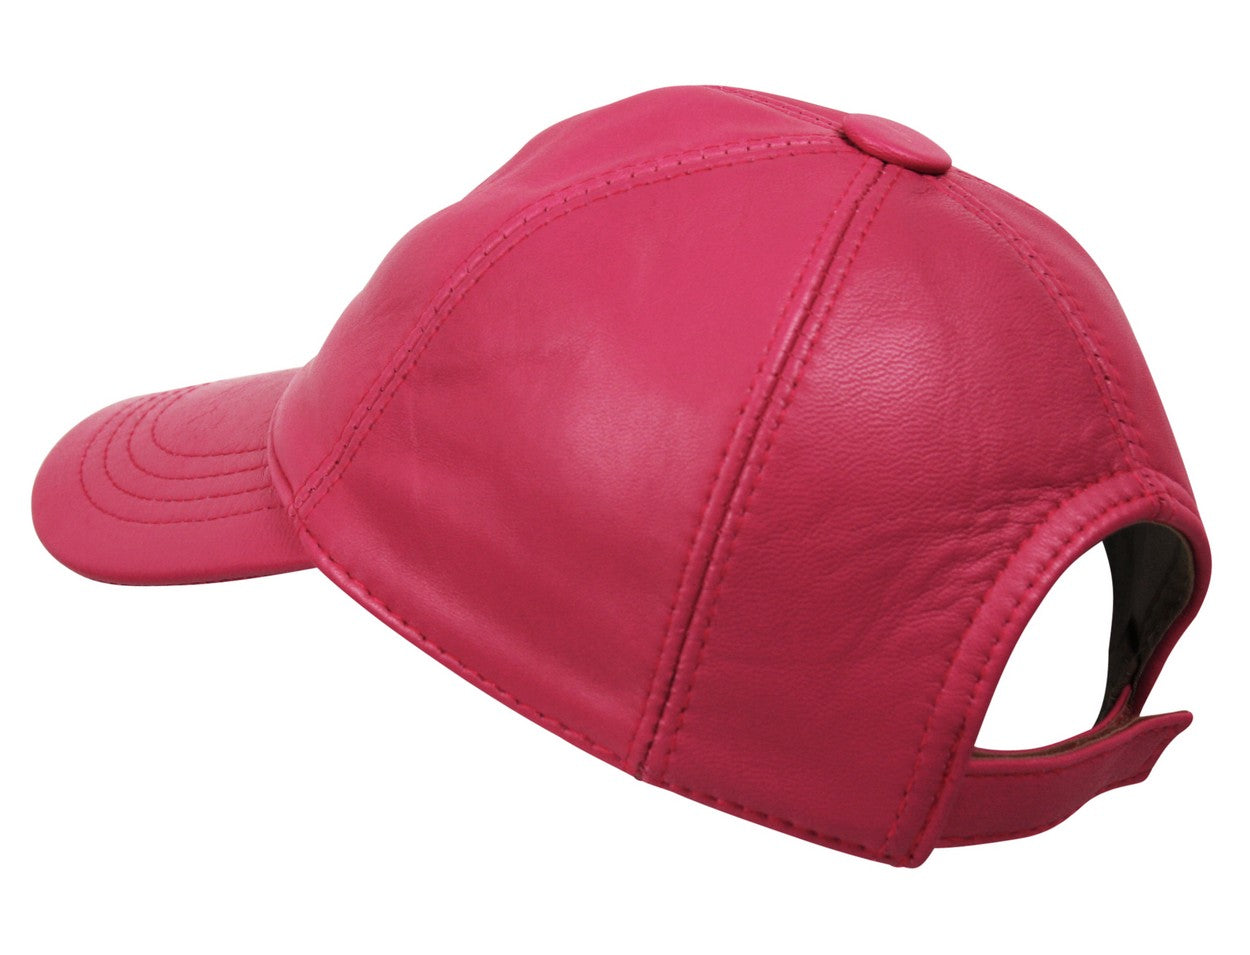 Genuine Leather Precurved Baseball Cap in Pink